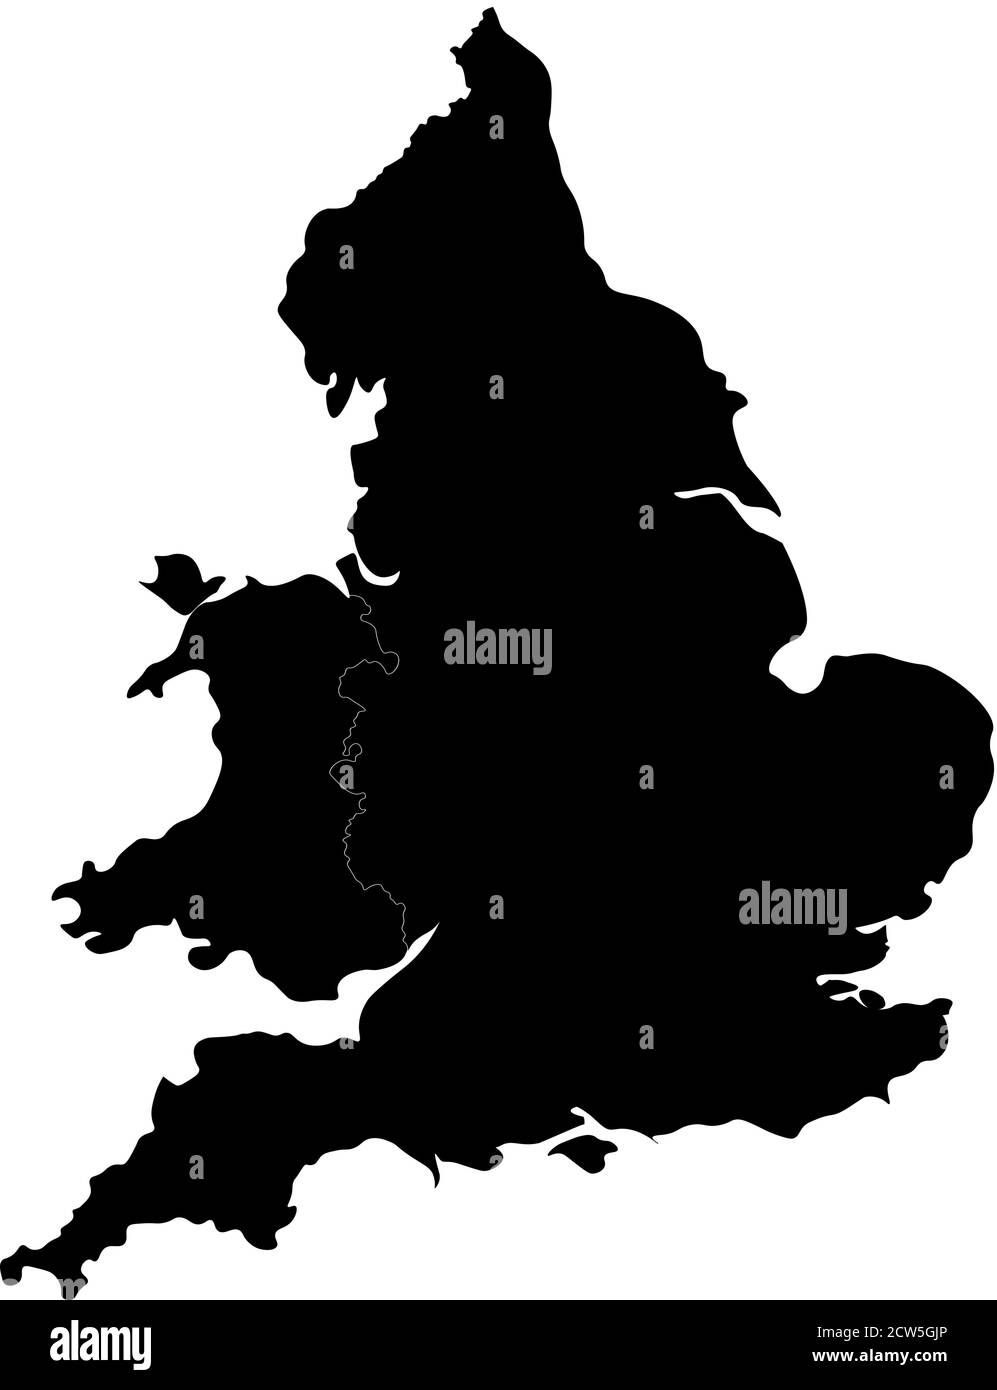 England and Wales silhouette. Nicely shaped map with rounded edges for elegant look. Vector illustration. Stock Vector